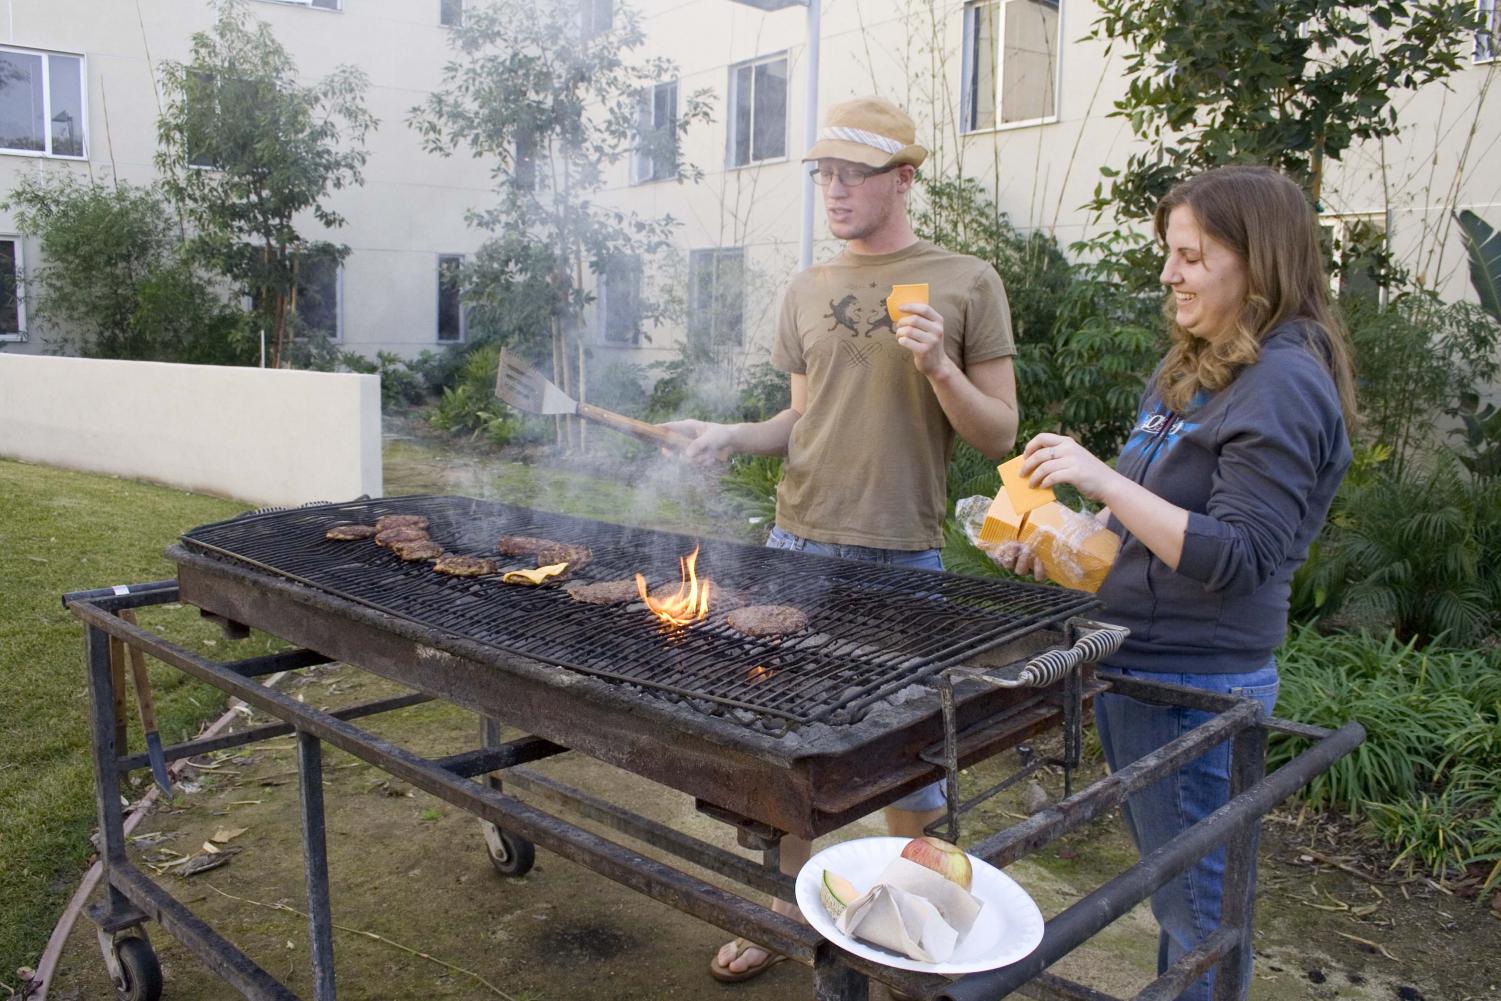 During the brother-sister barbeque friday afternoon outside Horton Hall, juniors Kevin Scholl and Stephanie Gaskins worked at the grill preparing the lunch. Hosting brother-sister floor events is just one of many duties performed by RAs.